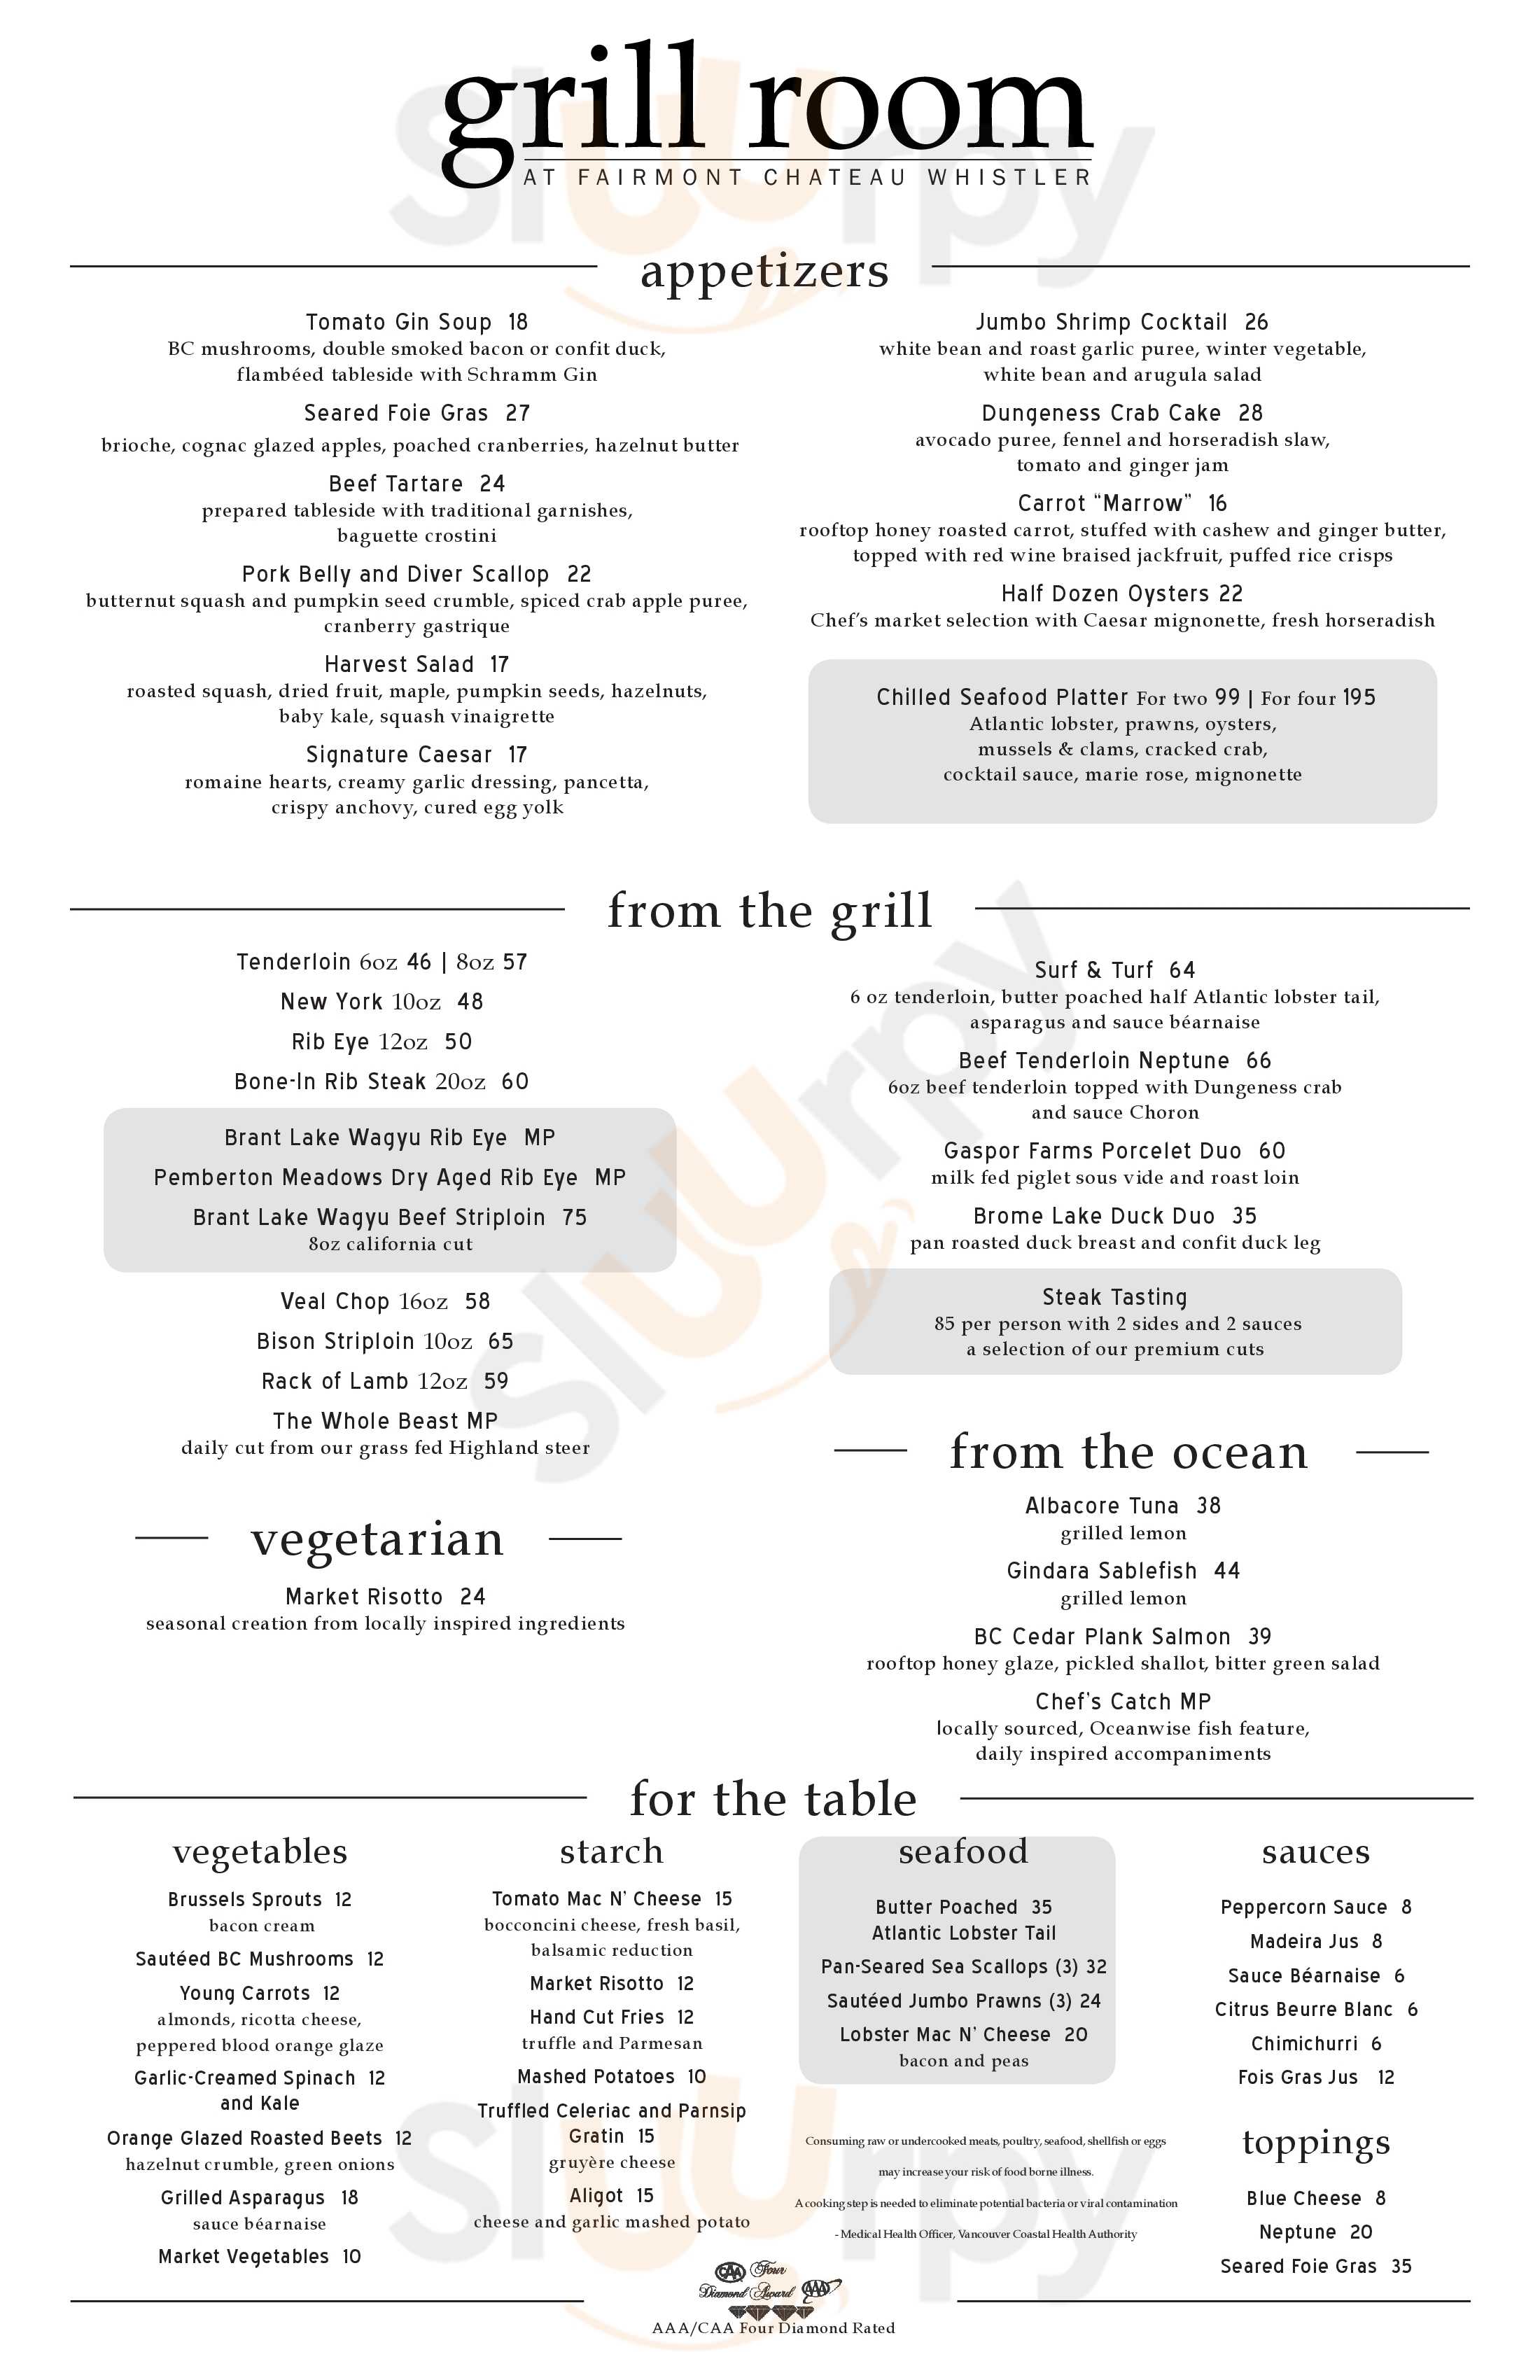 The Grill Room Whistler Menu - 1